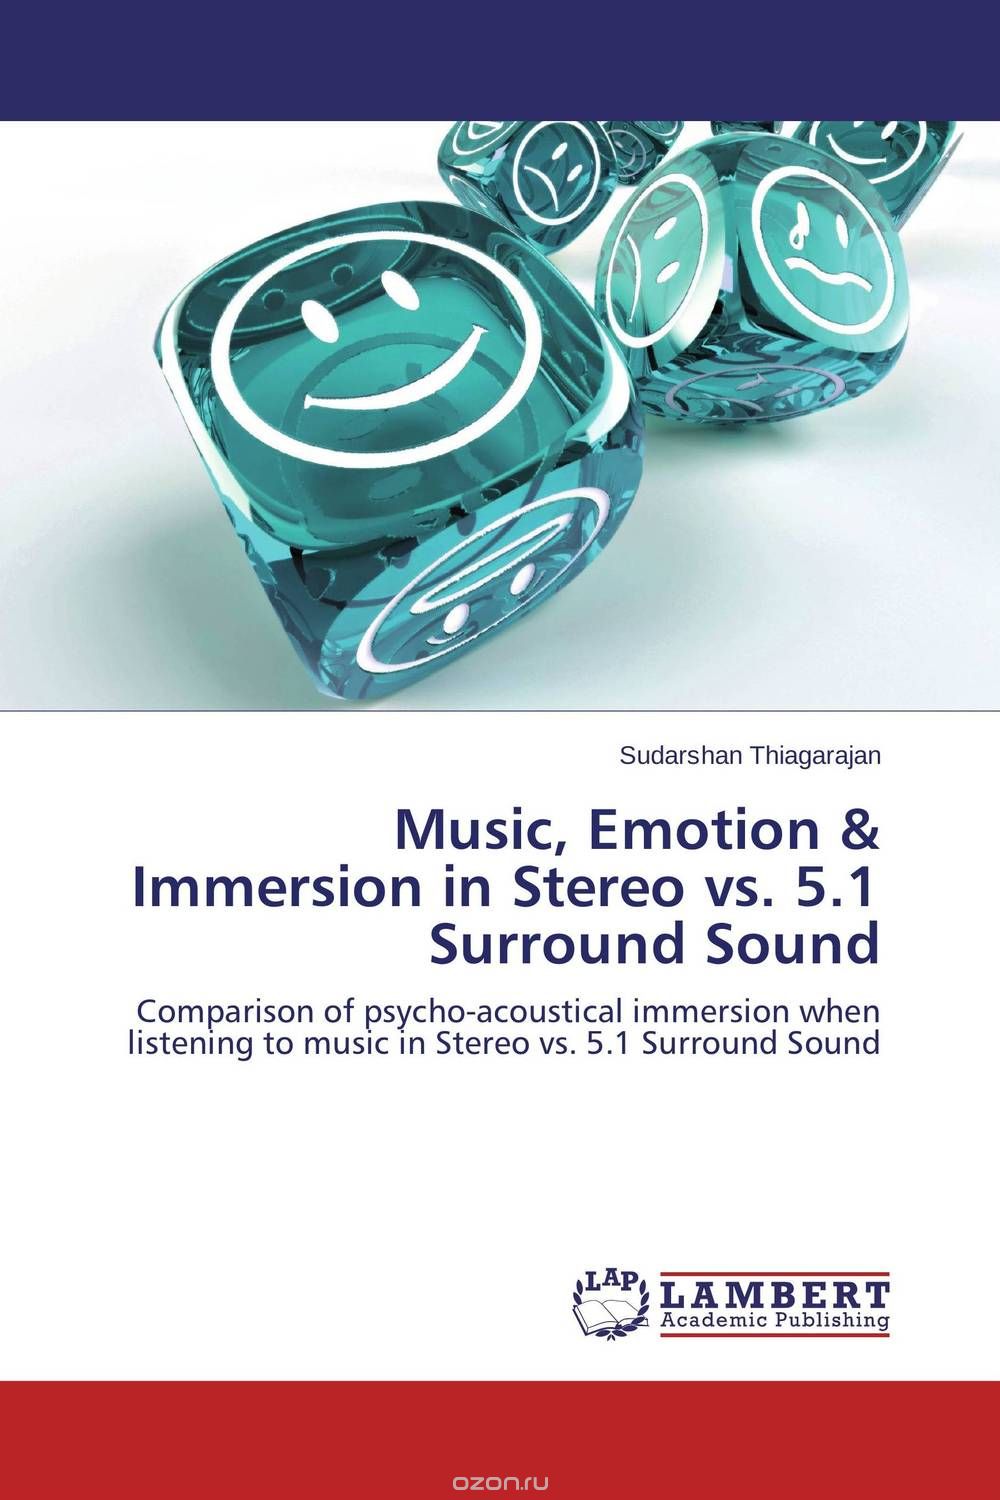 Music, Emotion & Immersion in Stereo vs. 5.1 Surround Sound